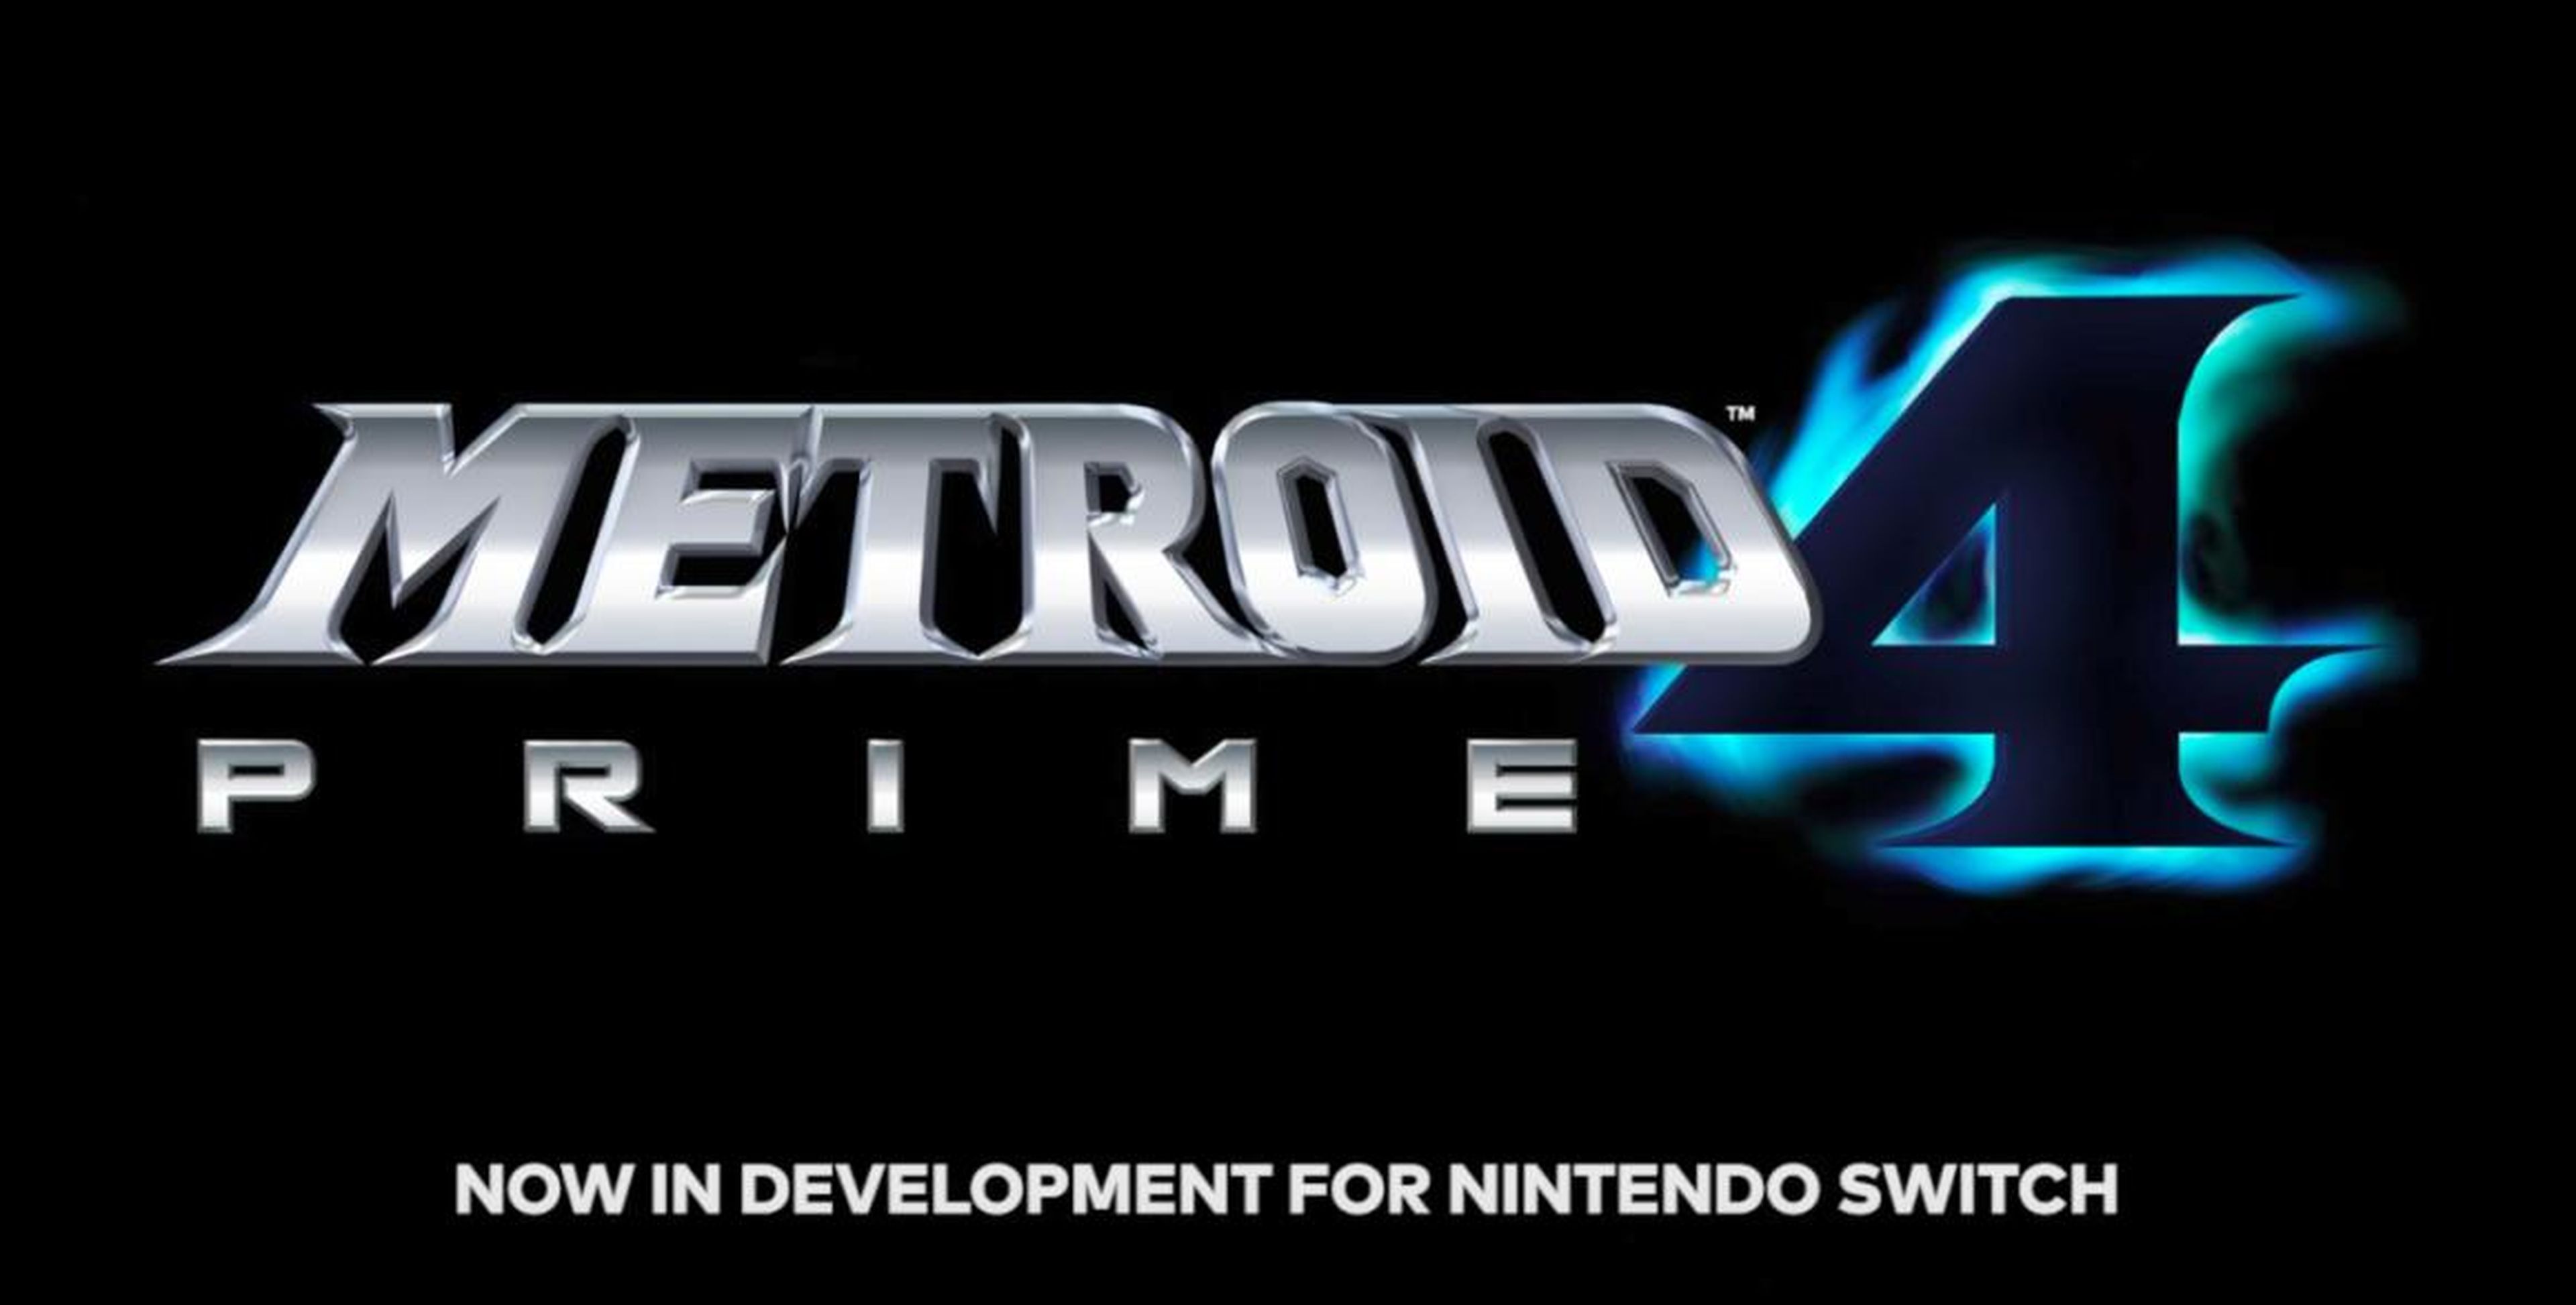 Nintendo first announced "Metroid Prime 4" at the E3 Expo in June 2017.